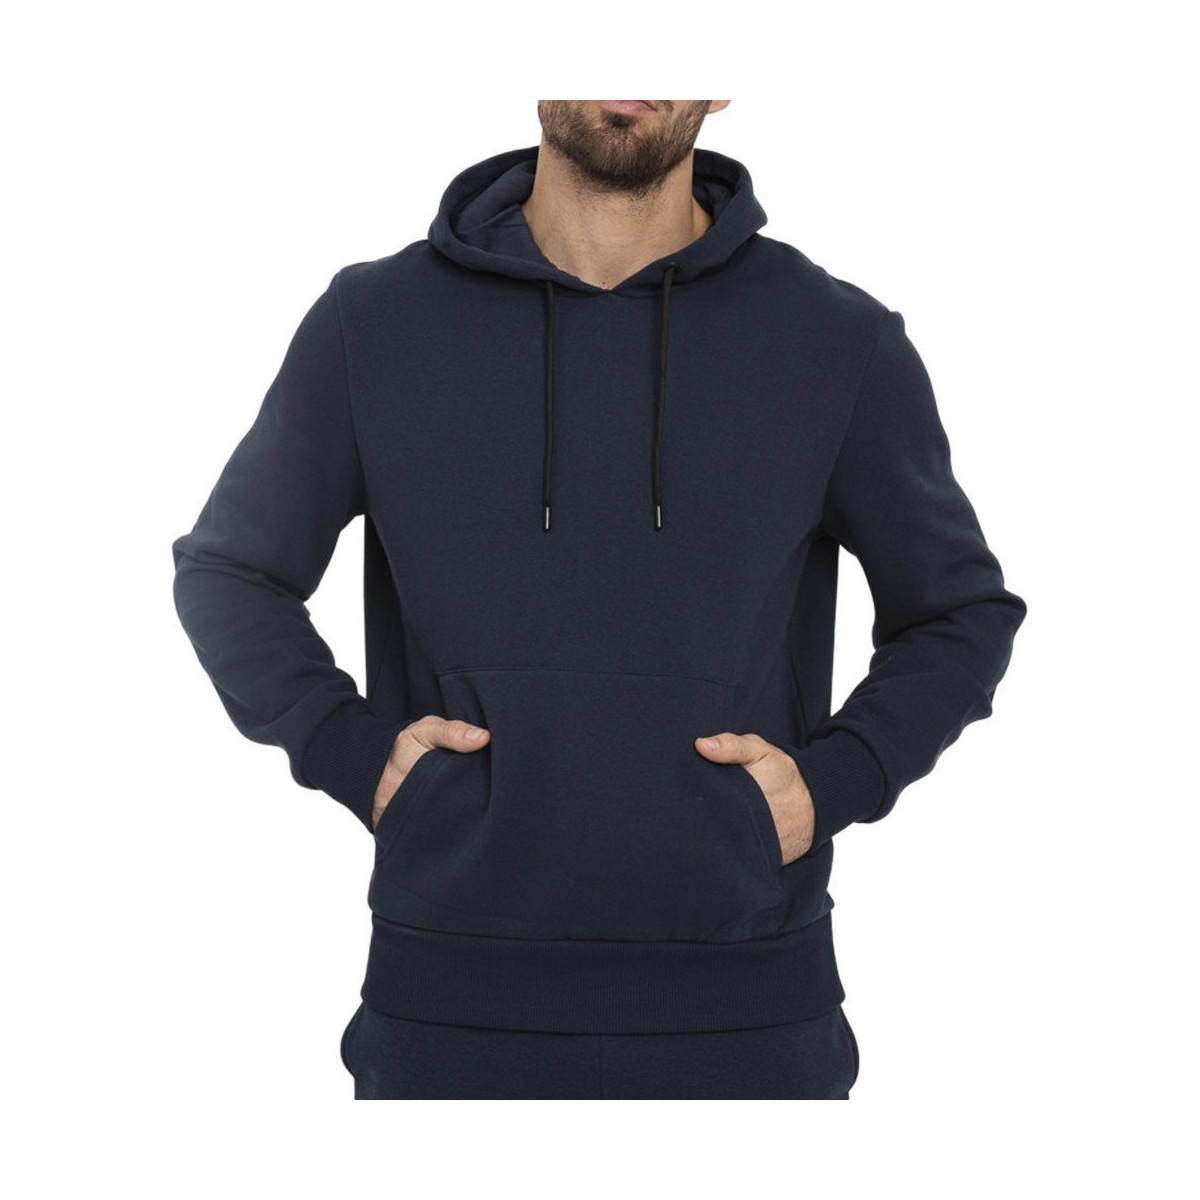 textil Hombre Sudaderas Paname Brothers  Azul